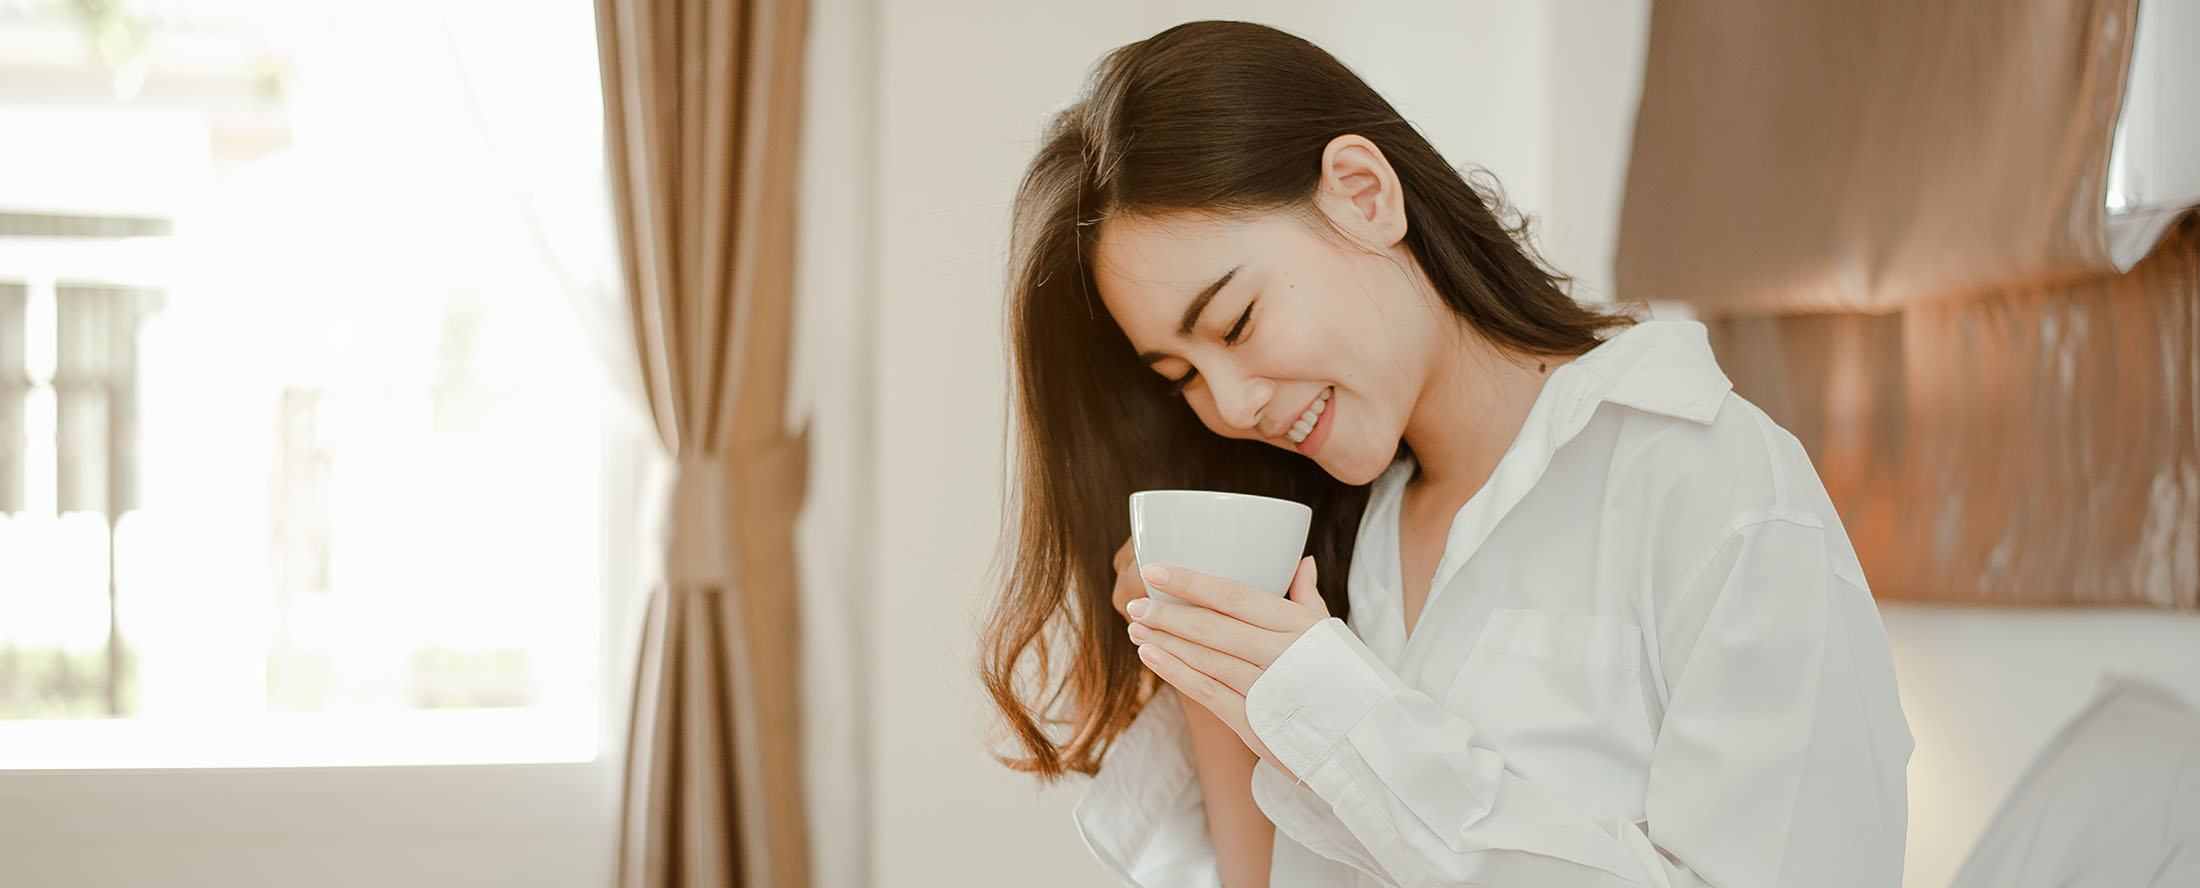 Young woman asia living at home relaxing and drinking cup of hot coffee in the bedroom on holiday. Asian, asia, relax, alone, technology, lifestyle concept.